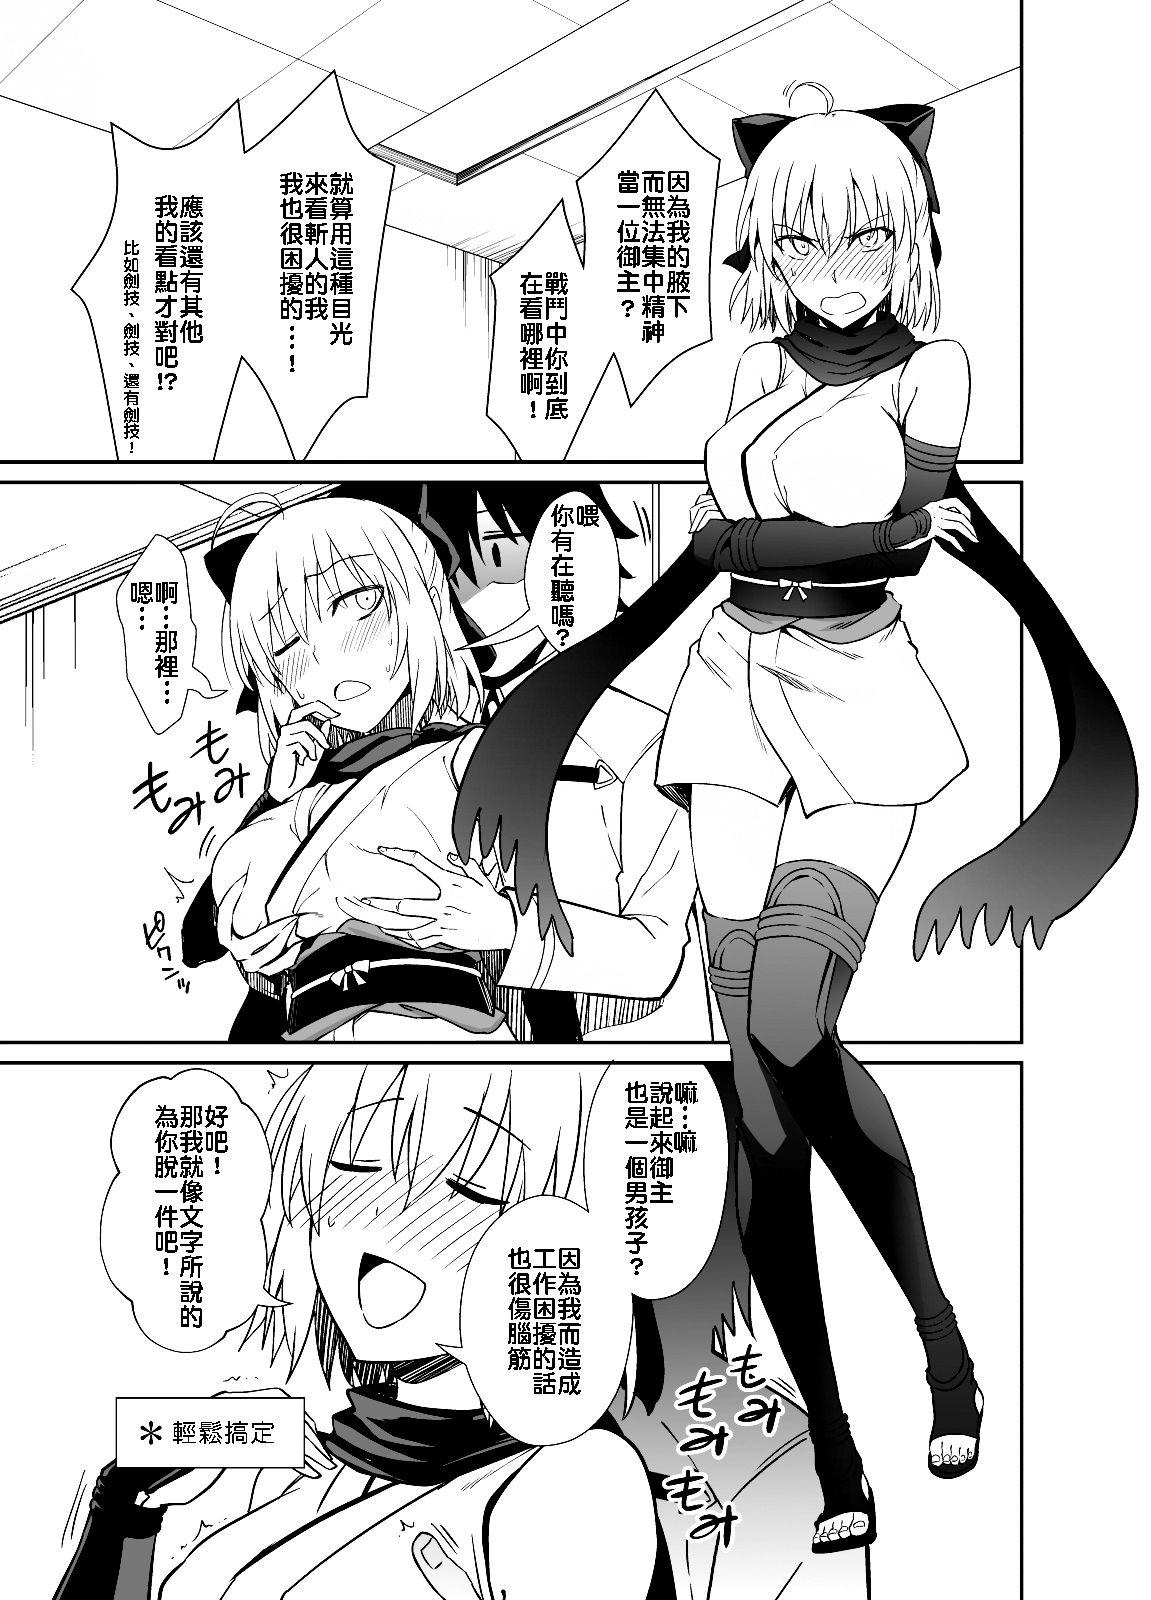 Stranger Okita-san to Sex - Fate grand order Shemale Sex - Page 3